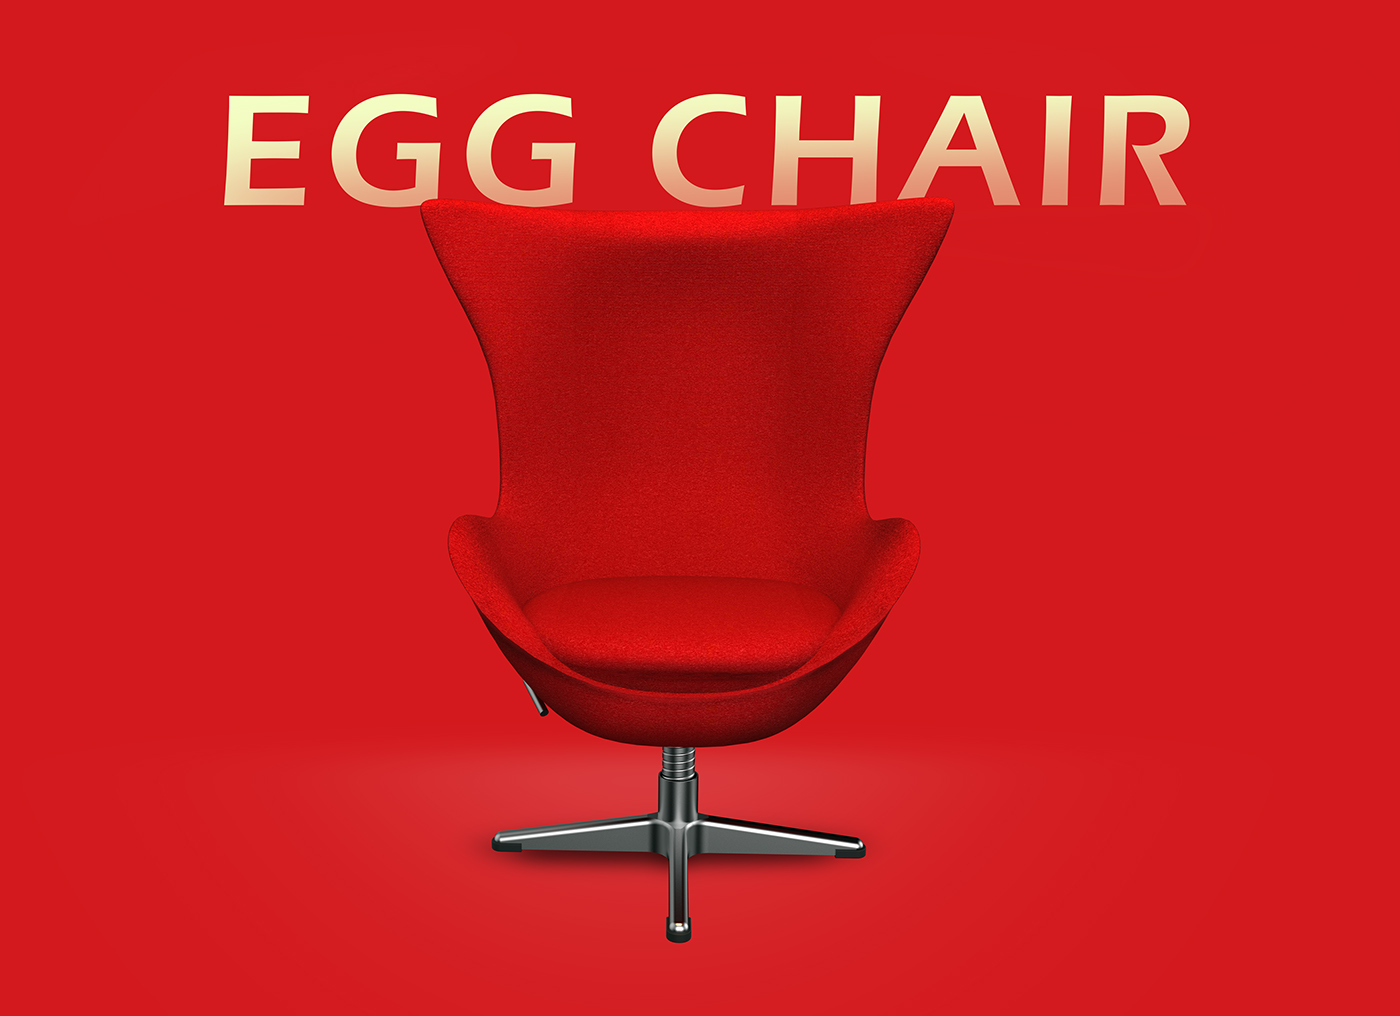 egg chair furniture arne jacobsen product design free model Interior architecture